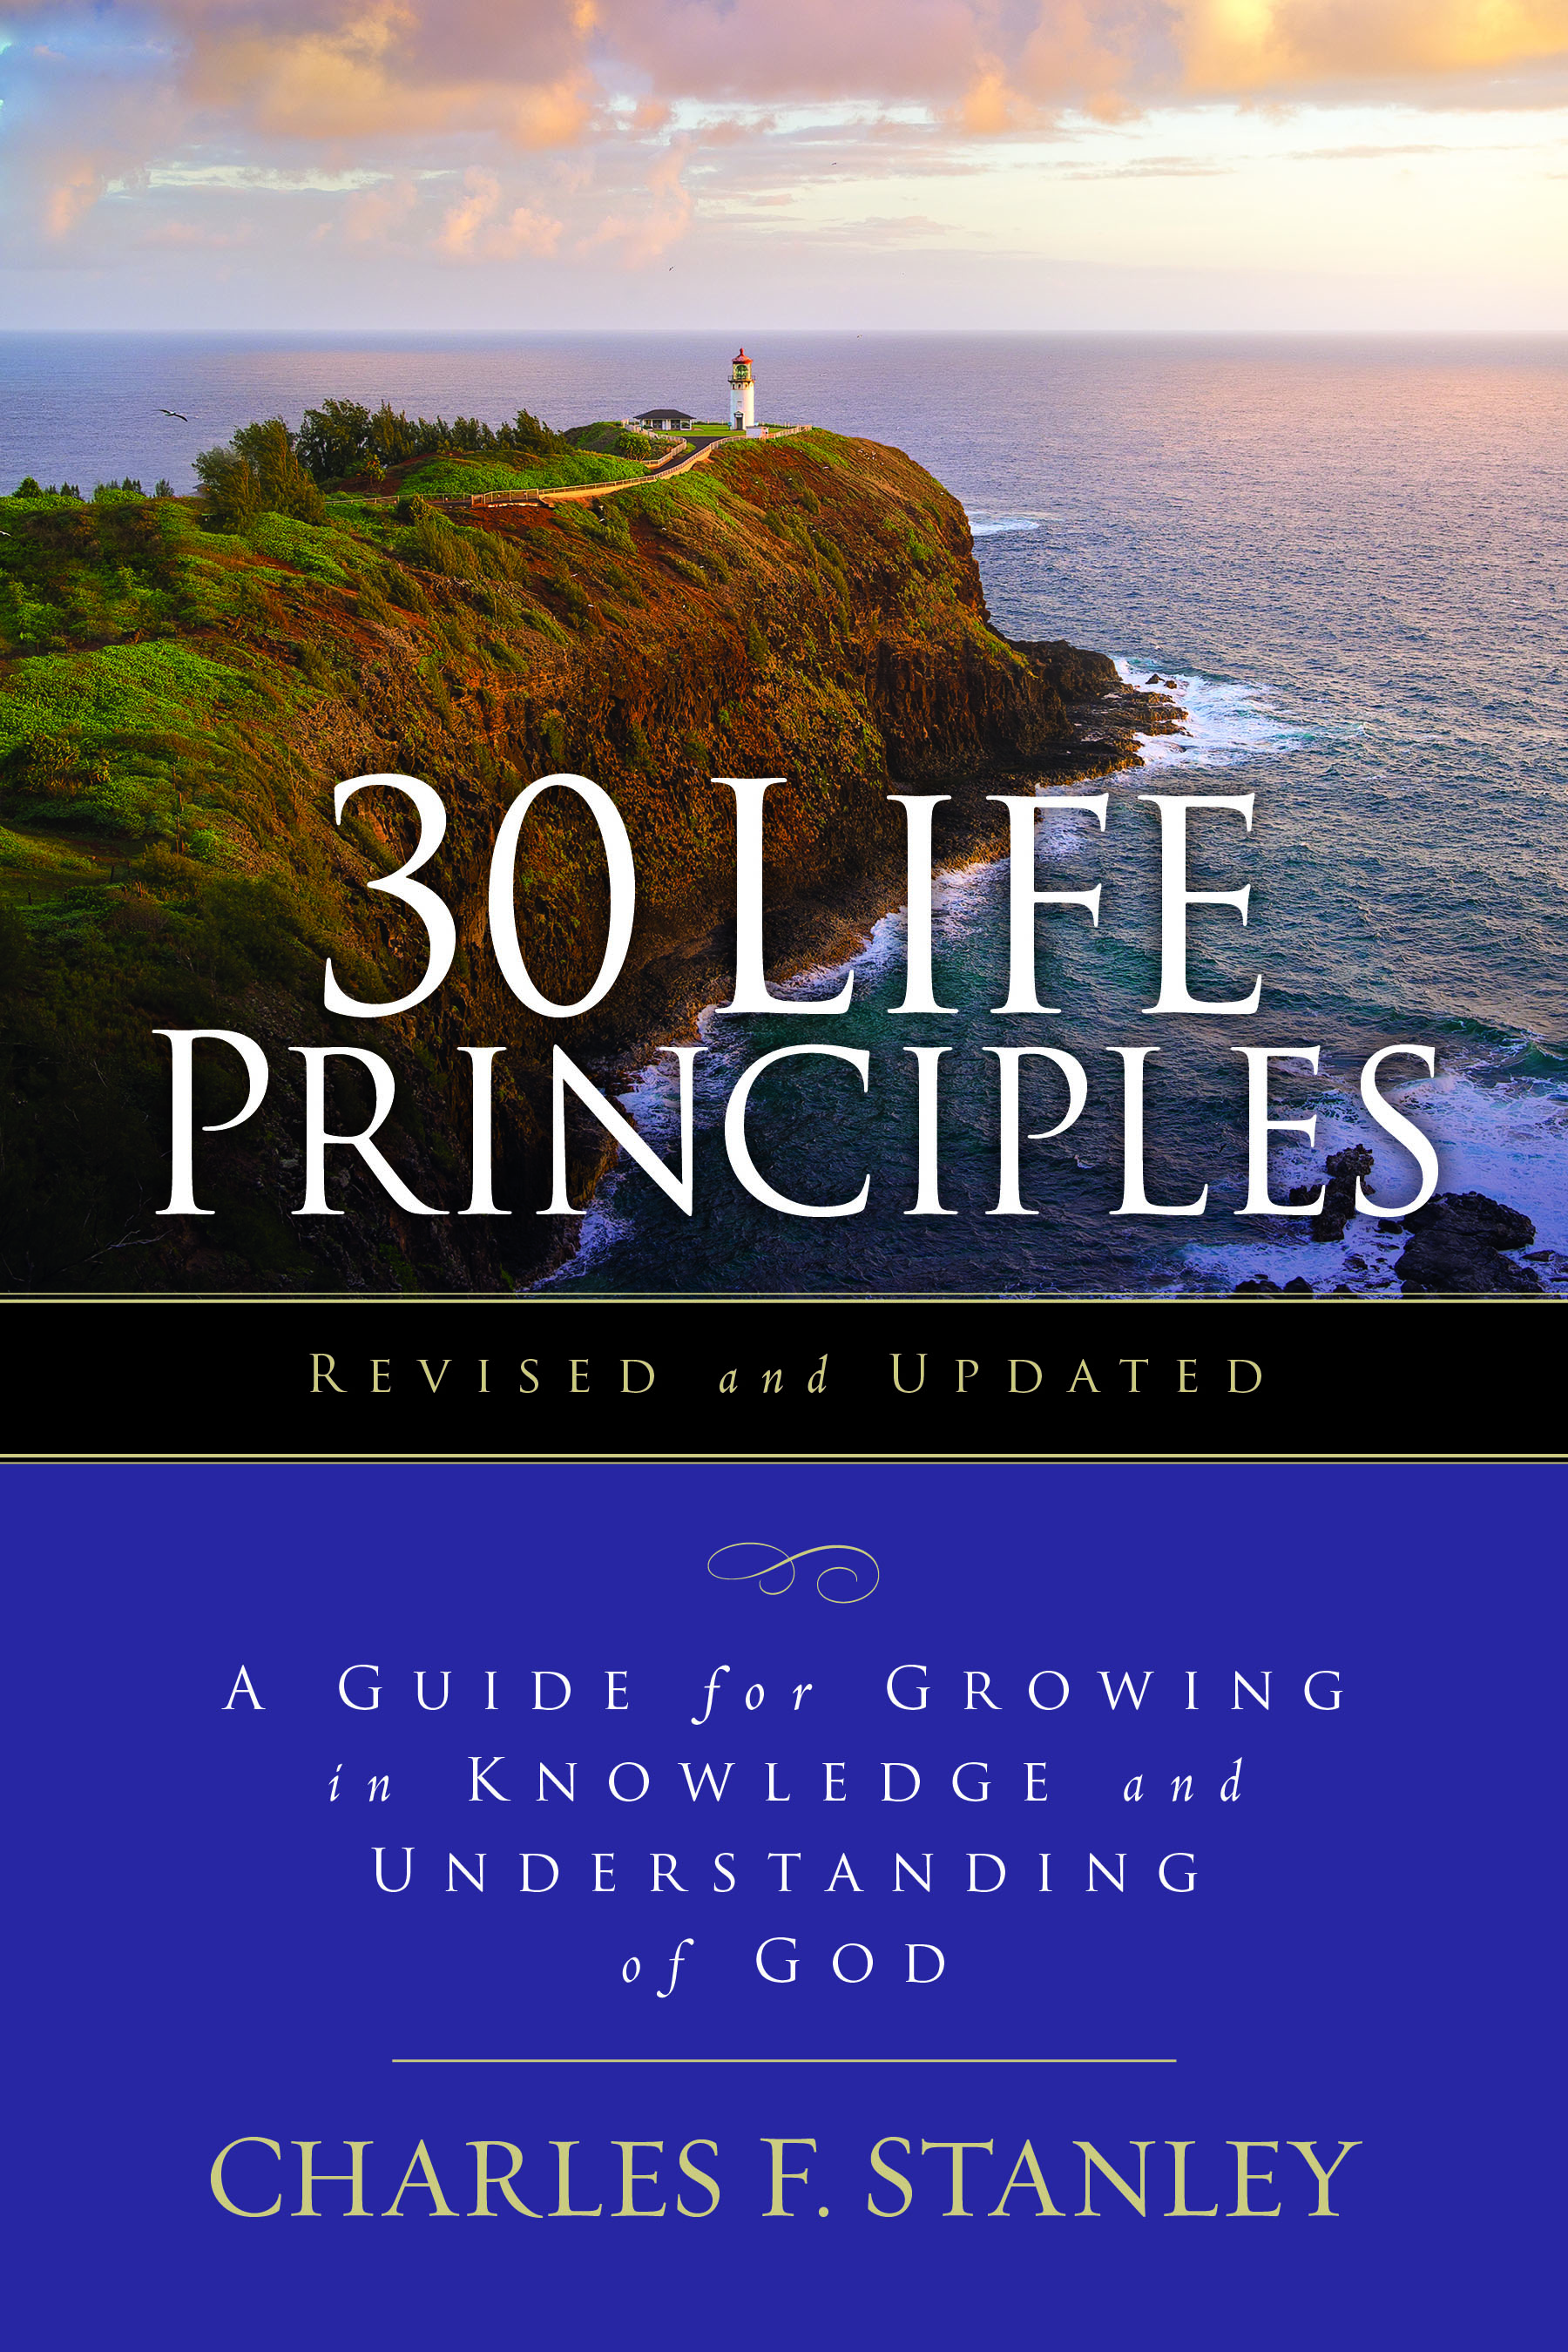 https://thehub.intouch.org/m/4c0cf030567aa9f7/original/30-Life-Principles-Study-Guide-Redesign_PG.jpg